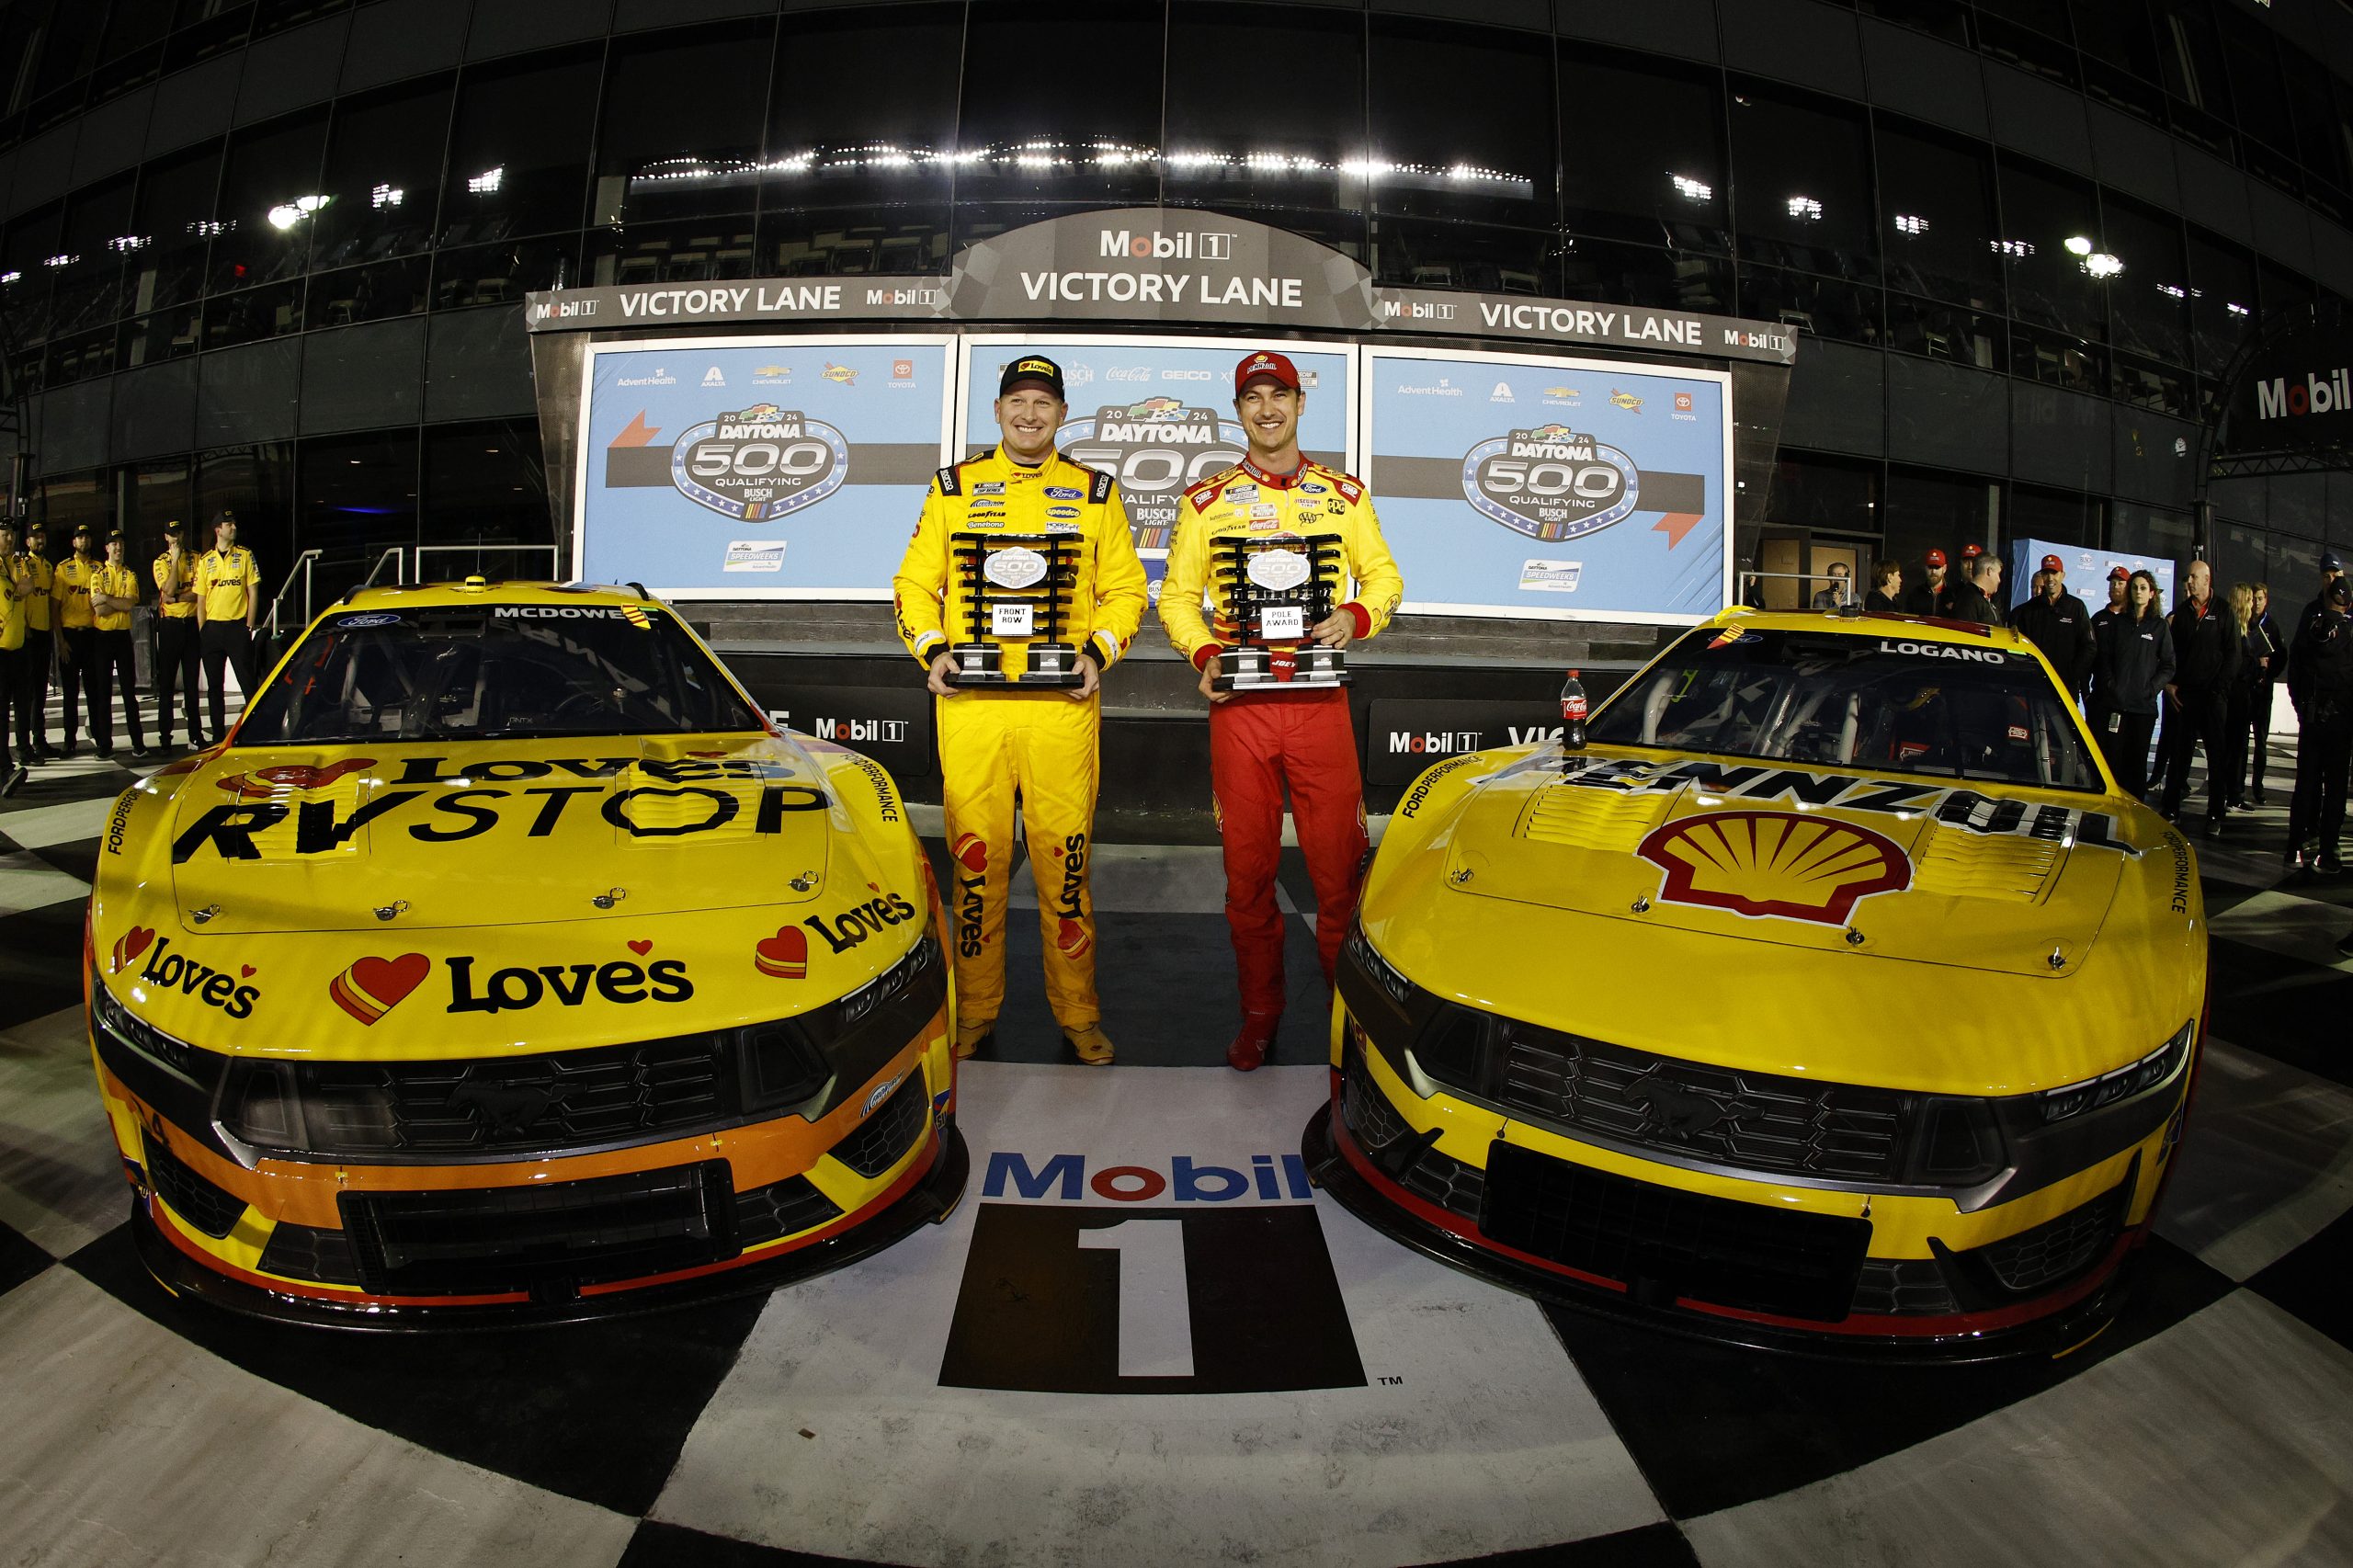 Joey Logano, driver of the #22 Shell Pennzoil Ford, (R) winner of the Daytona 500 pole award and Michael McDowell, driver of the #34 Love's Travel Stops Ford, Front Row second fastest winner pose for a photo during qualifying for the NASCAR Cup Series Daytona 500 at Daytona International Speedway on February 14, 2024 in Daytona Beach, Florida. daytona 500 pole